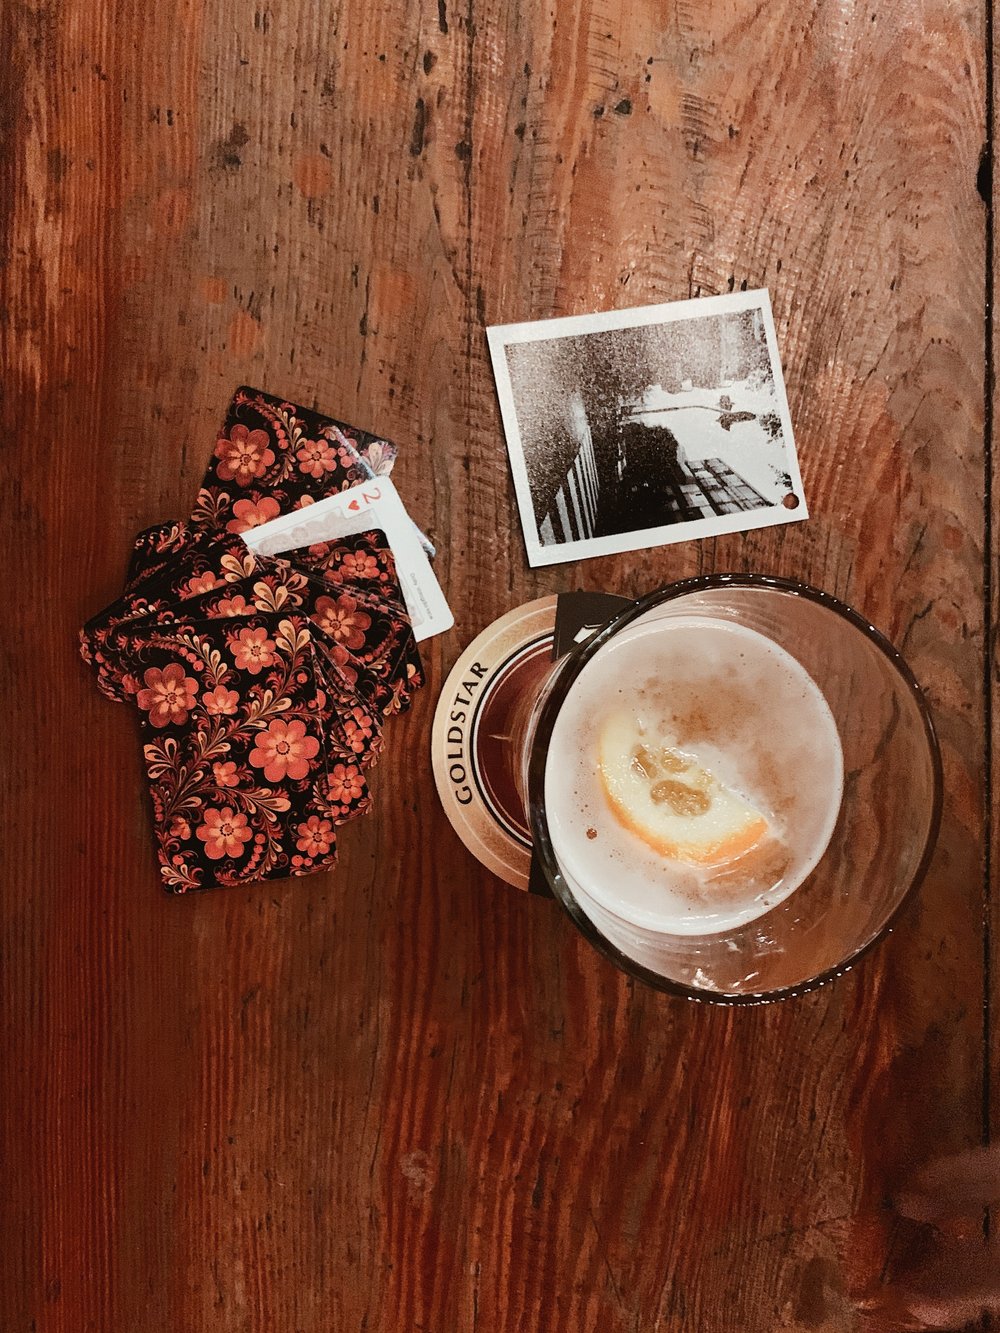 a drink next to a hand of playing cards and a photograph